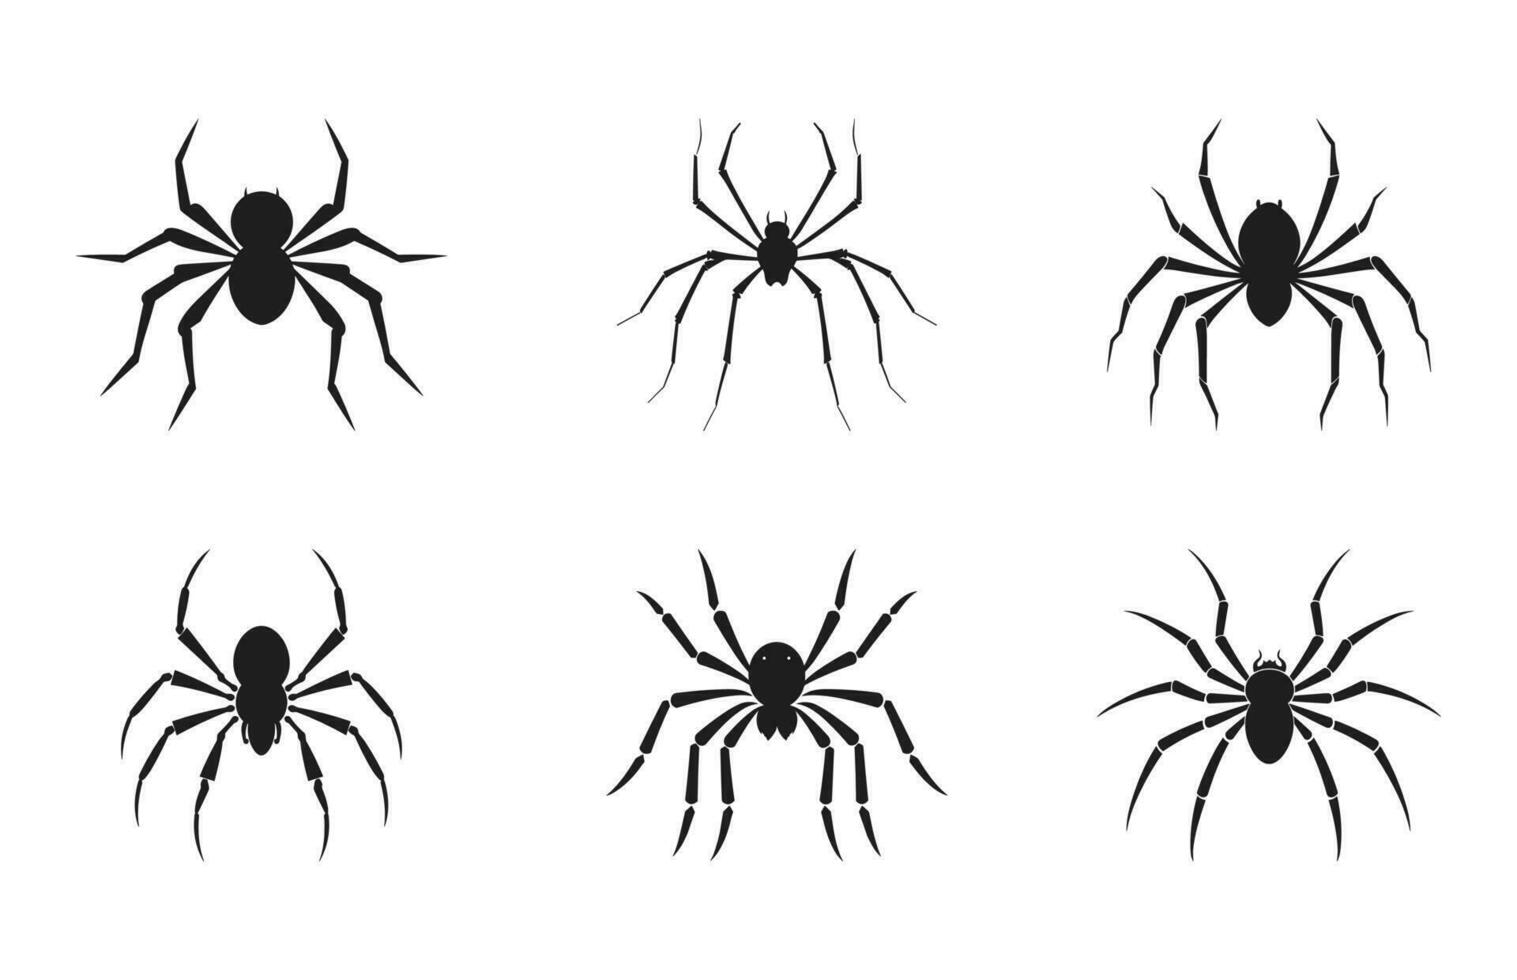 Spider silhouettes vector Clipart Free, Scary spider black silhouette Set